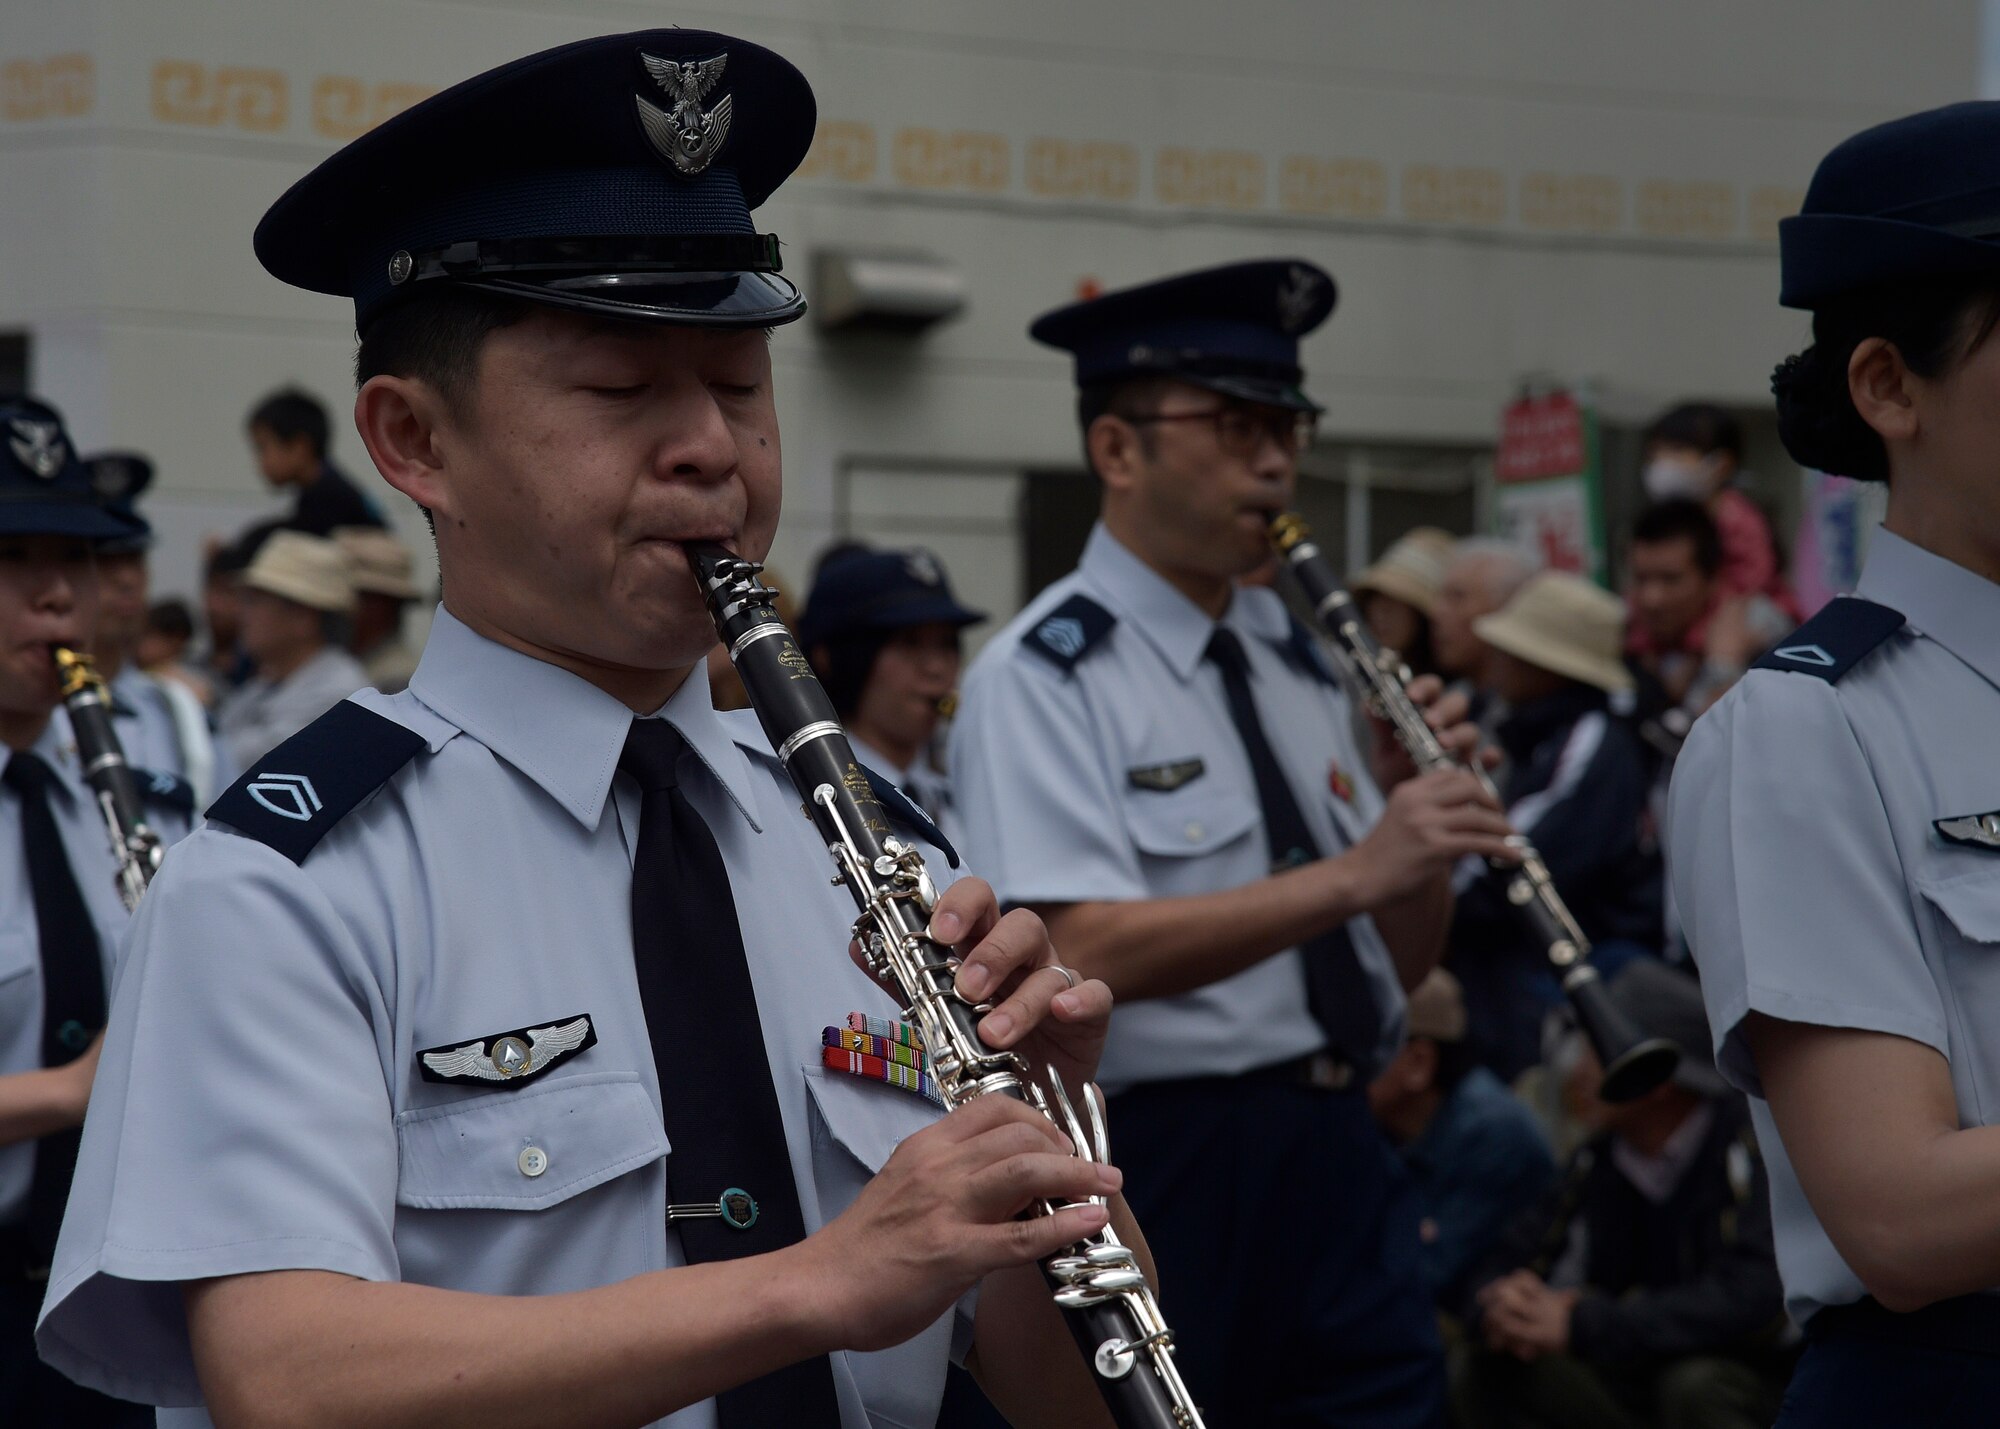 A Japan Air Self-Defense Force band member plays the clarinet during the 28th Annual American Day parade in Misawa City, Japan, June 5, 2016. Events like these are important as they afford Misawa neighbors, American and Japanese alike, opportunities to interact in a relaxed environment specifically planned for building friendships. More than 80,000 attendees from across the Aomori Prefecture traveled to Misawa City to enjoy American and Japanese culture. (U.S. Air Force photo by Senior Airman Deana Heitzman)